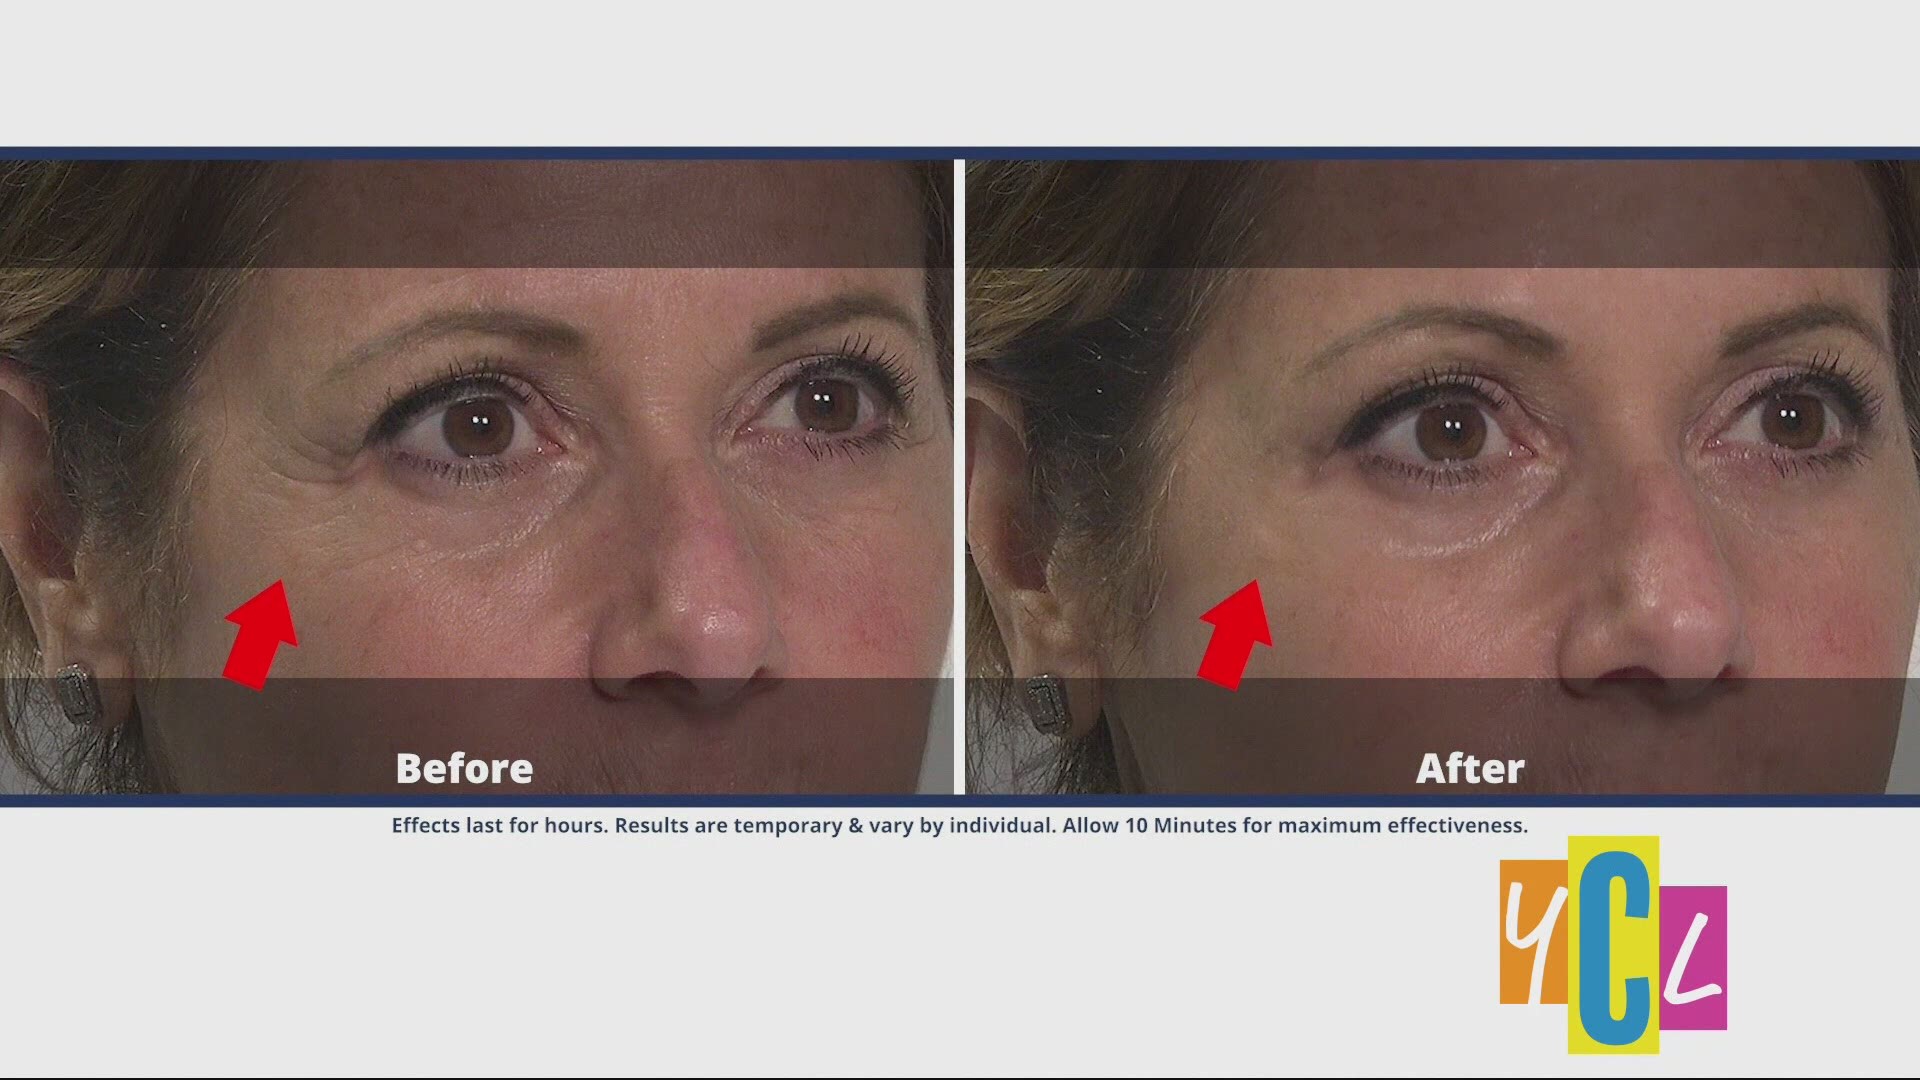 A fast-acting formula that reduces the appearance of undereye bags, wrinkles and more. 
This segment was paid for by True Earth Health Solutions.